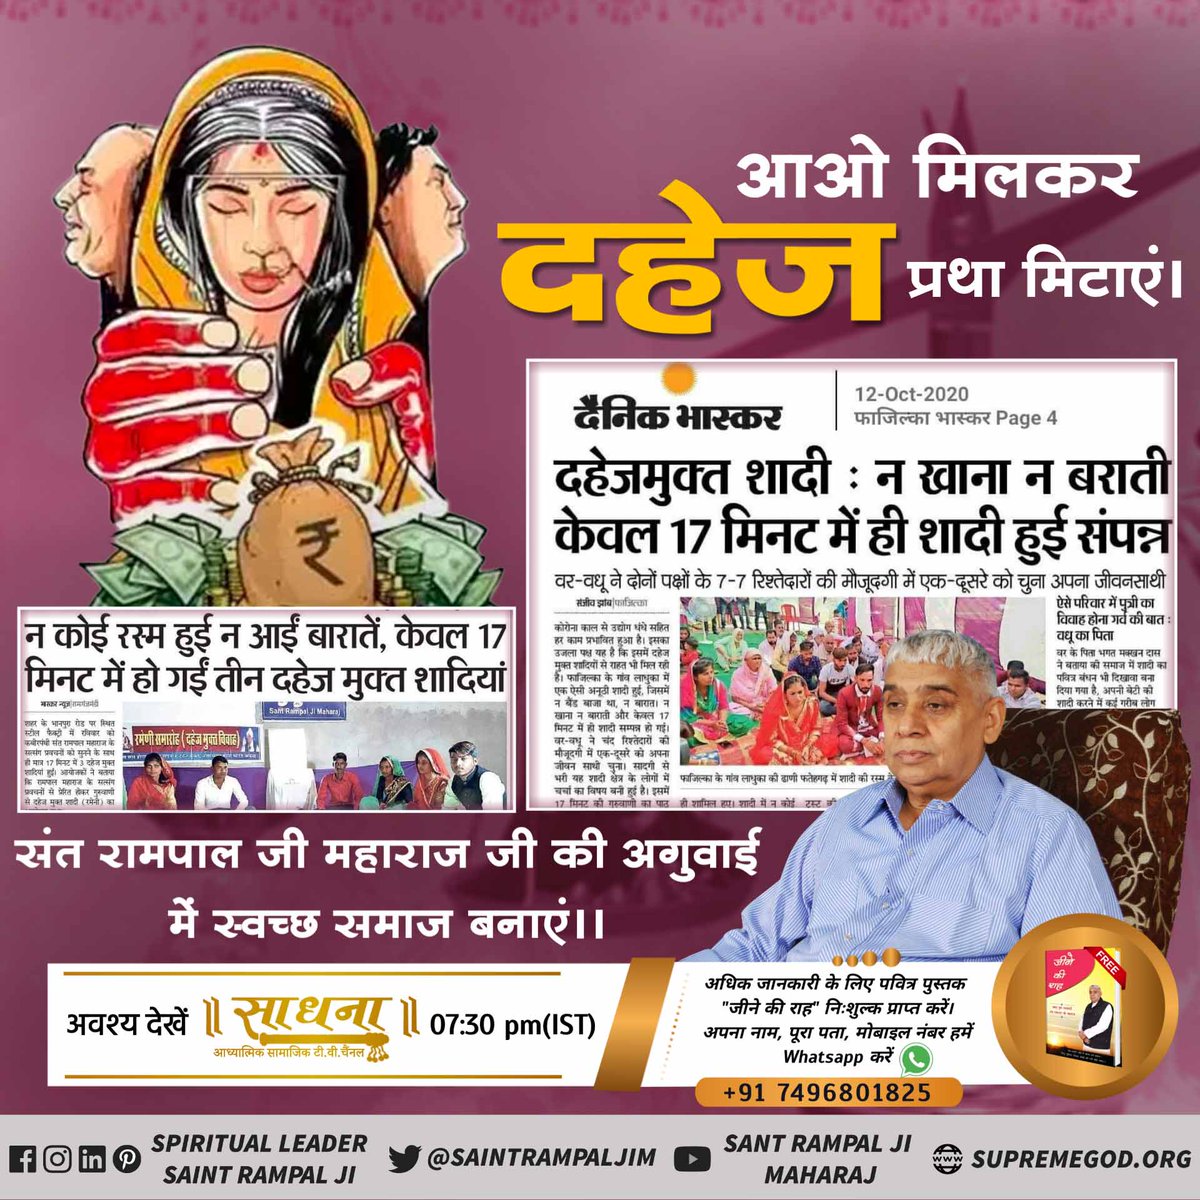 #GodMorningSaturday 
#दहेज_दानव_का_अंत_हो
Dowry Free India 
The disciples of Sant Rampal Ji Maharaj get married within a matter of 17 minutes and there is no give and take of Dowry from either sides.